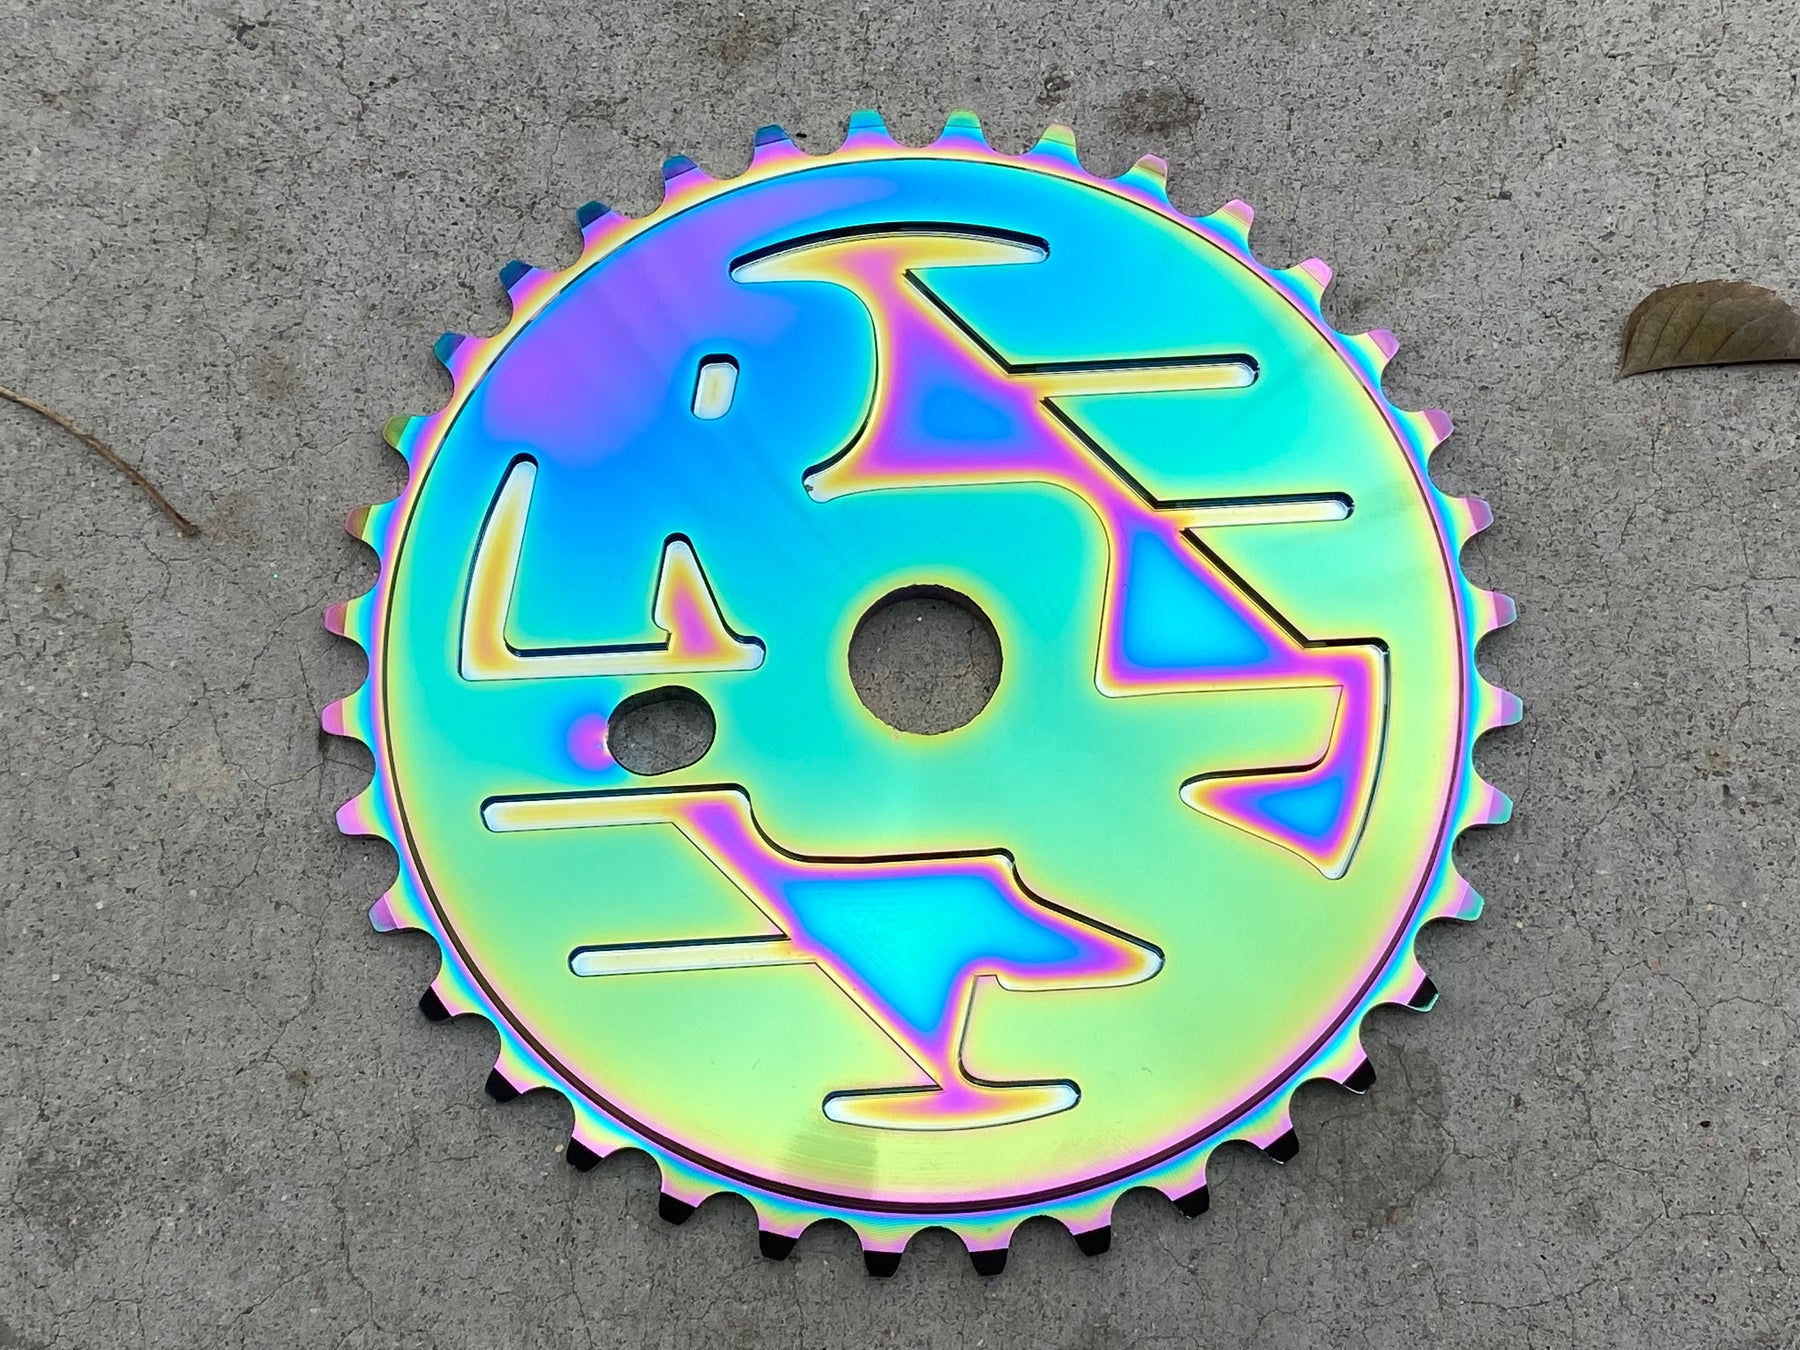 ros-ride-out-supply-freewheel-spoke-covers-seat-clamp-se-sticker-kit-sprocket-bikes-skins-16t-reflective